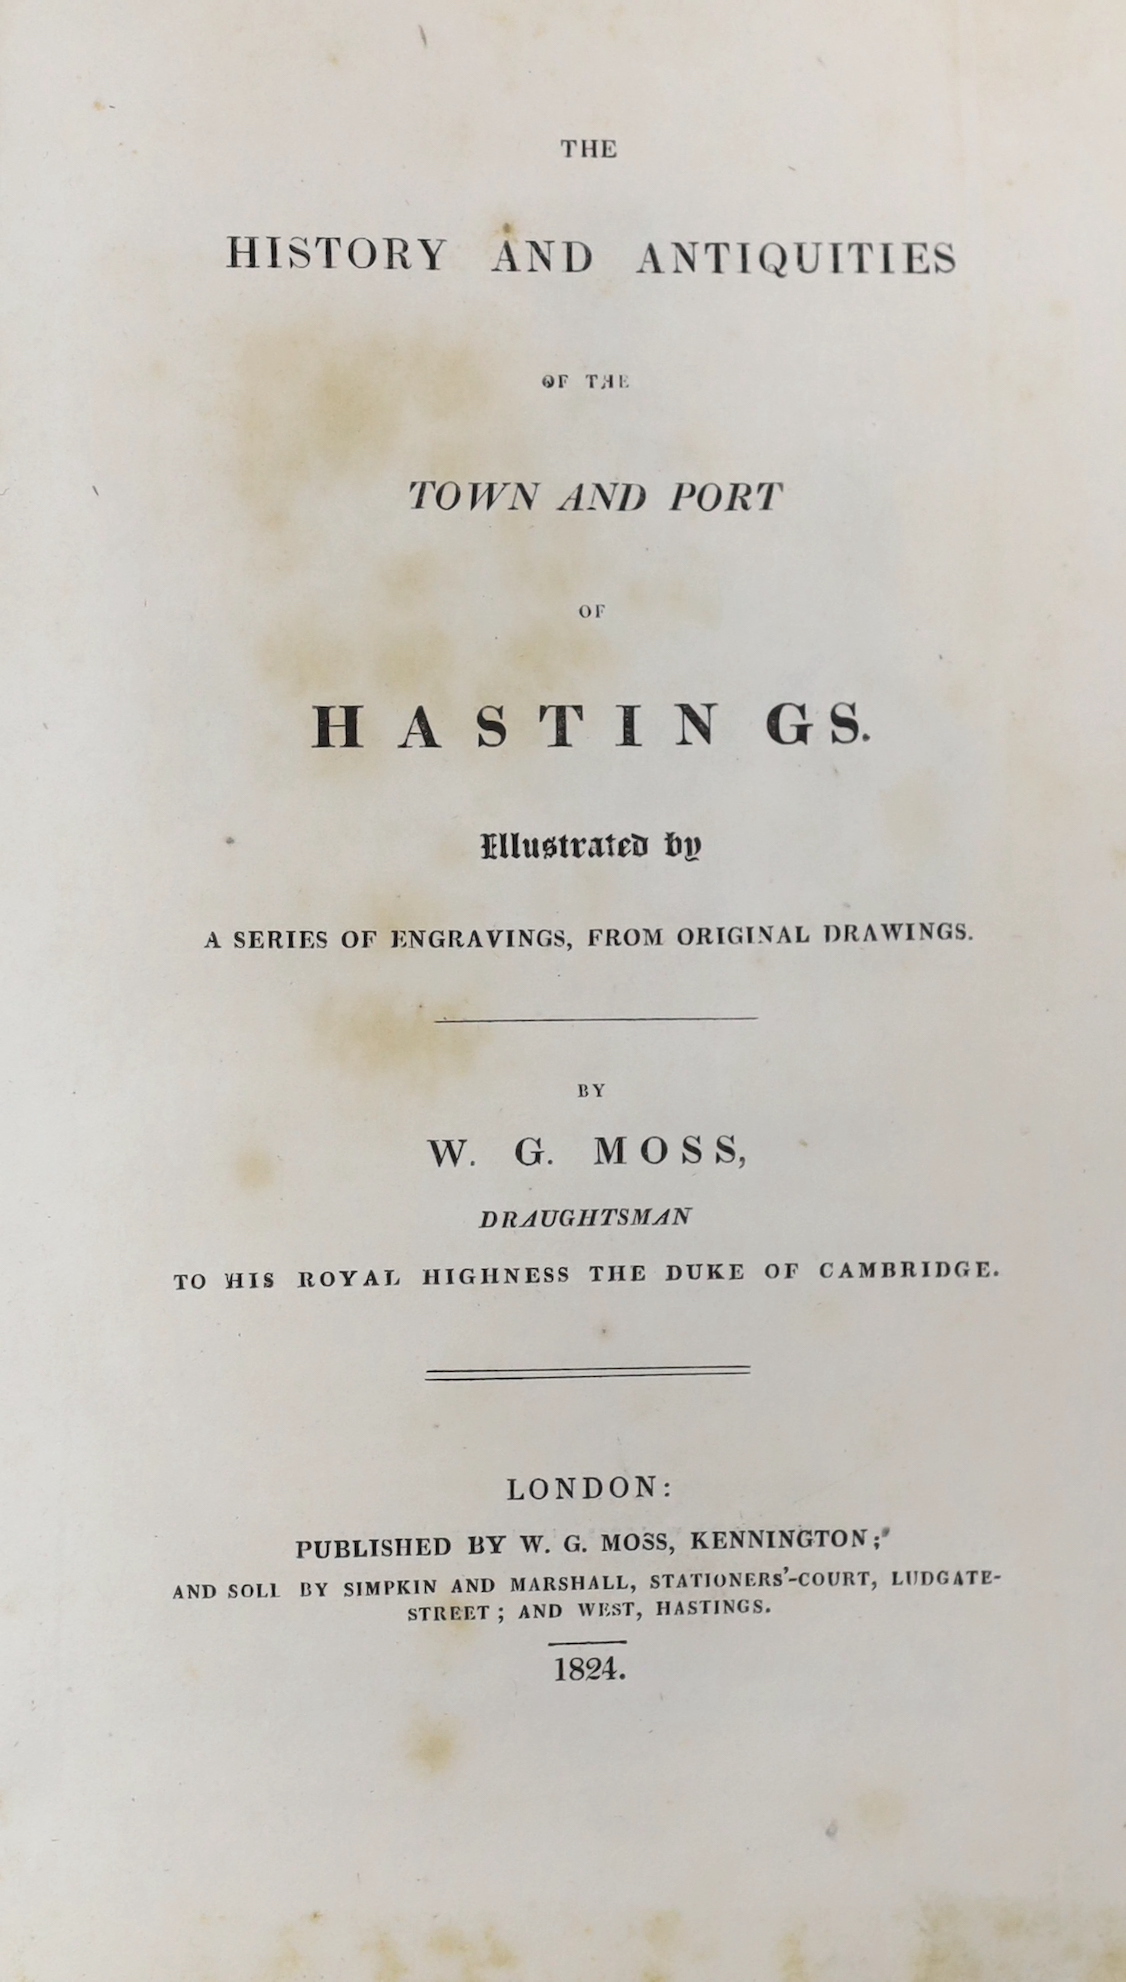 HASTINGS - Moss, W.G - The History and Antiquities of the Town and Port of Hastings, 8vo, black blind stamped morocco gilt, with 20 engraved plates, including a folding map and 1 extra illustration, a manuscript ‘’Extrac